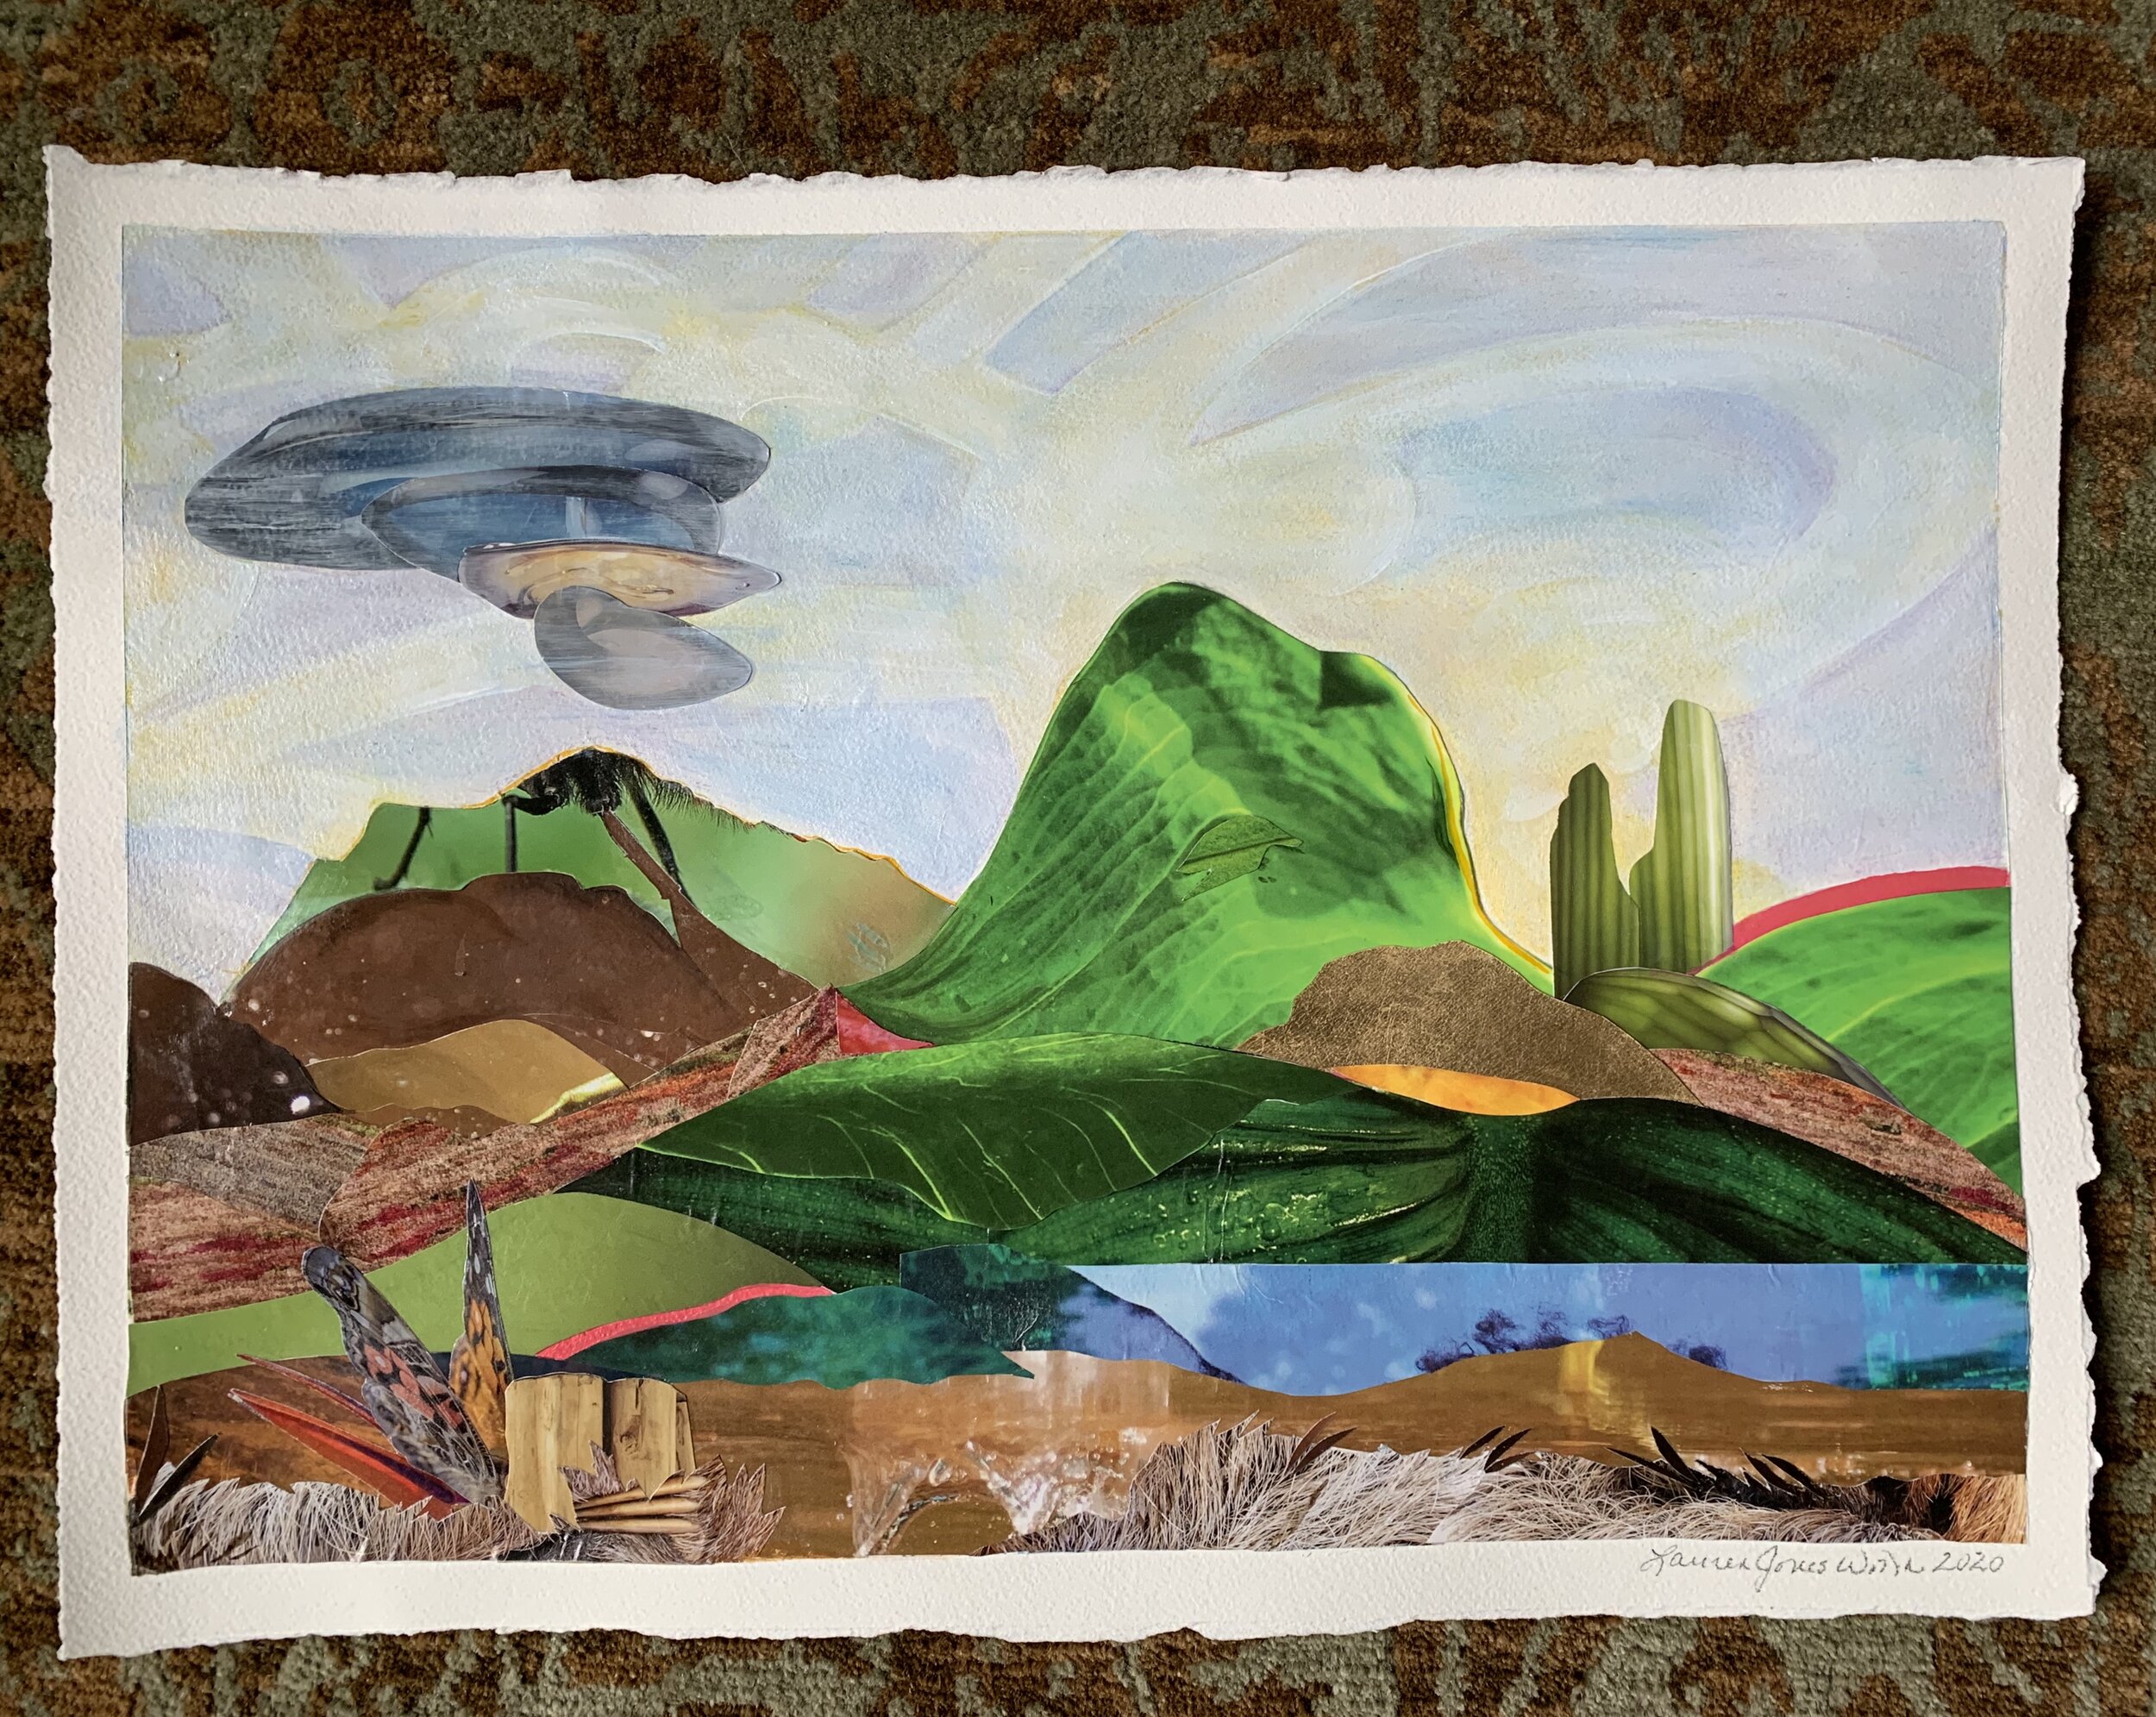 LENTICULAR CLOUDS OVER PATAGONIA, 12x16 inches,  20x24 inches framed,  mixed collage on paper (2020)